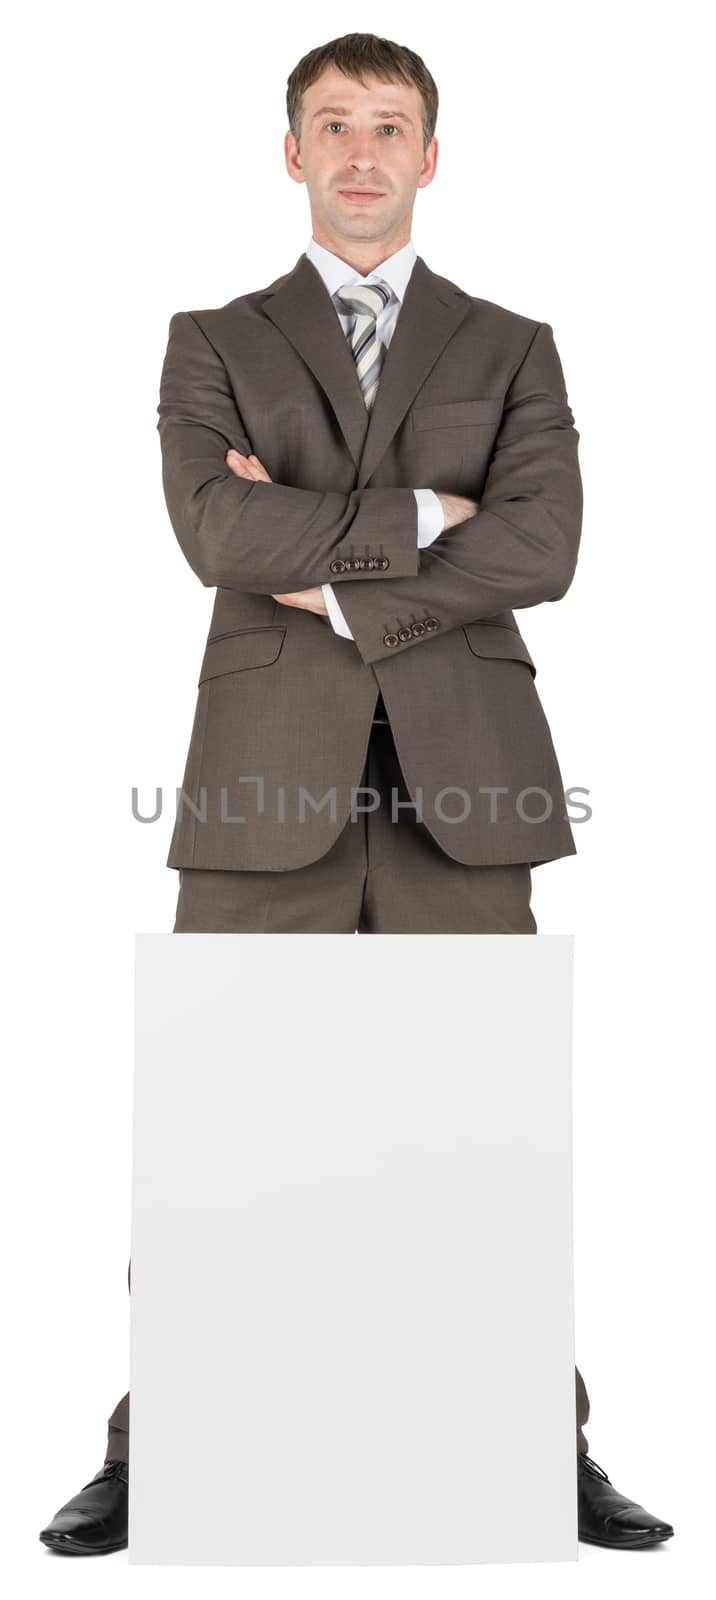 Businessman with crossed arms behind blank paper isolated on white background